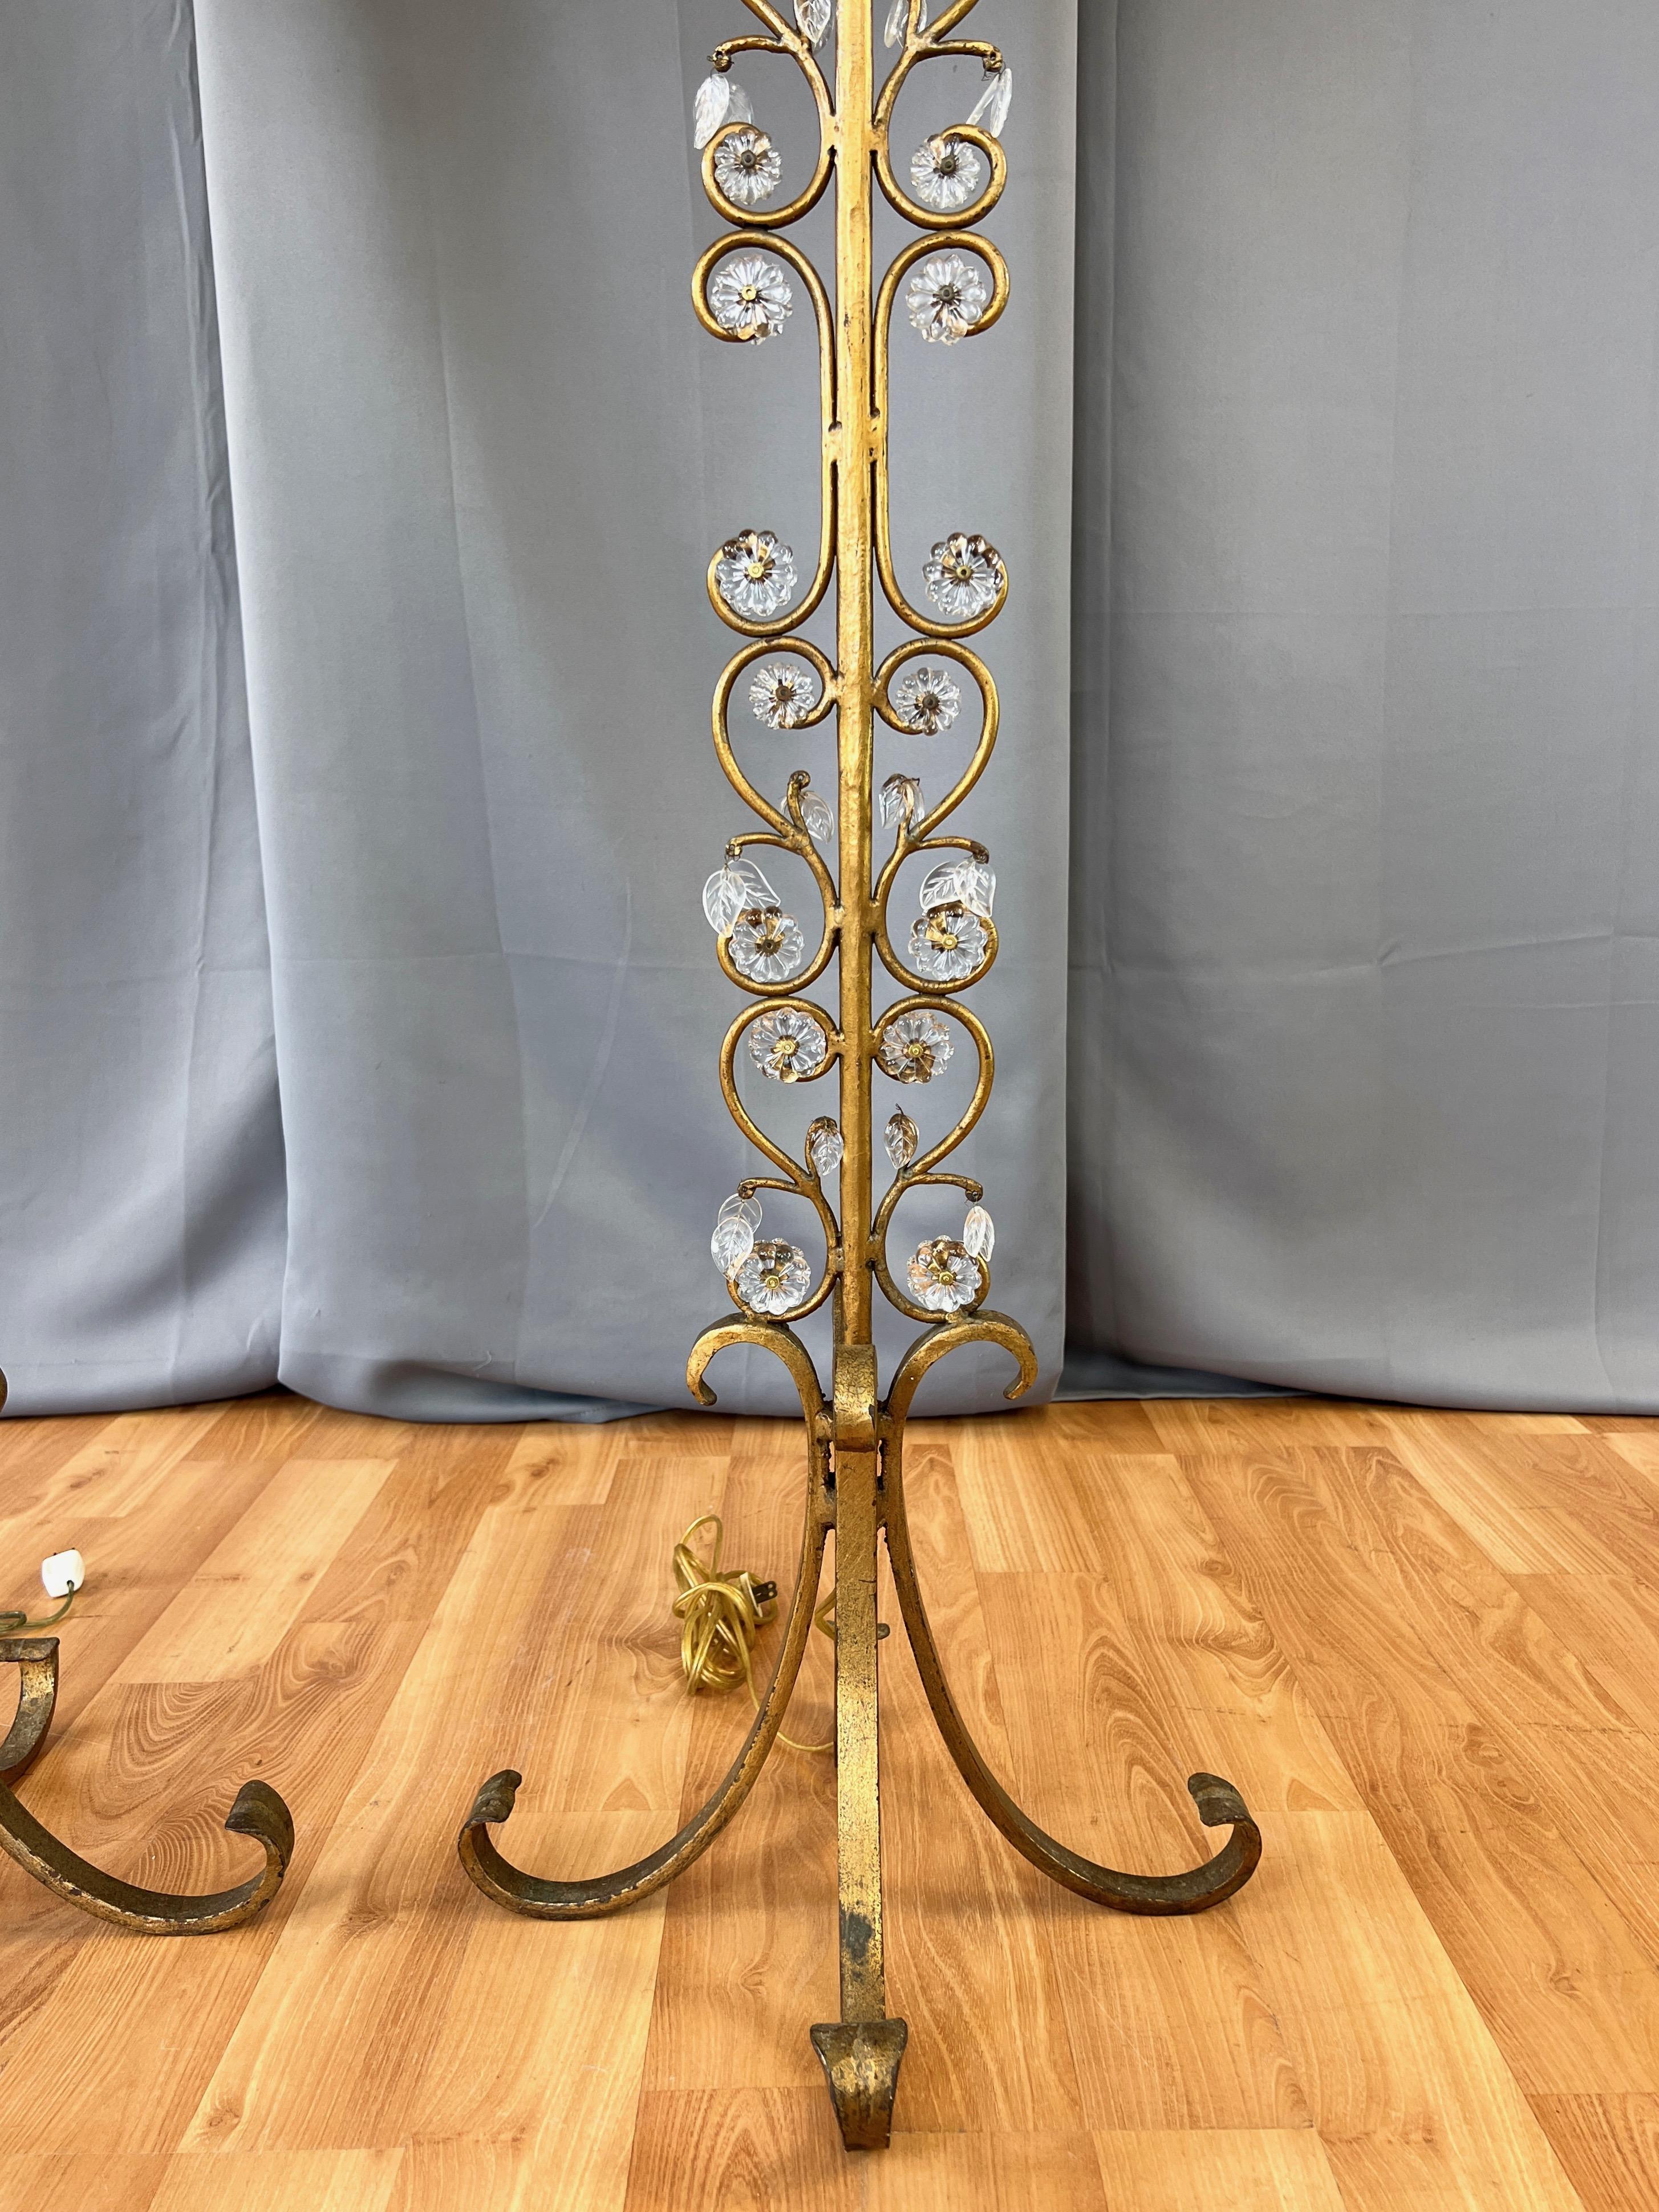 Pair of Italian Gilt Wrought Iron Floor Lamps with Glass Florets & Leaves, 1950s For Sale 5